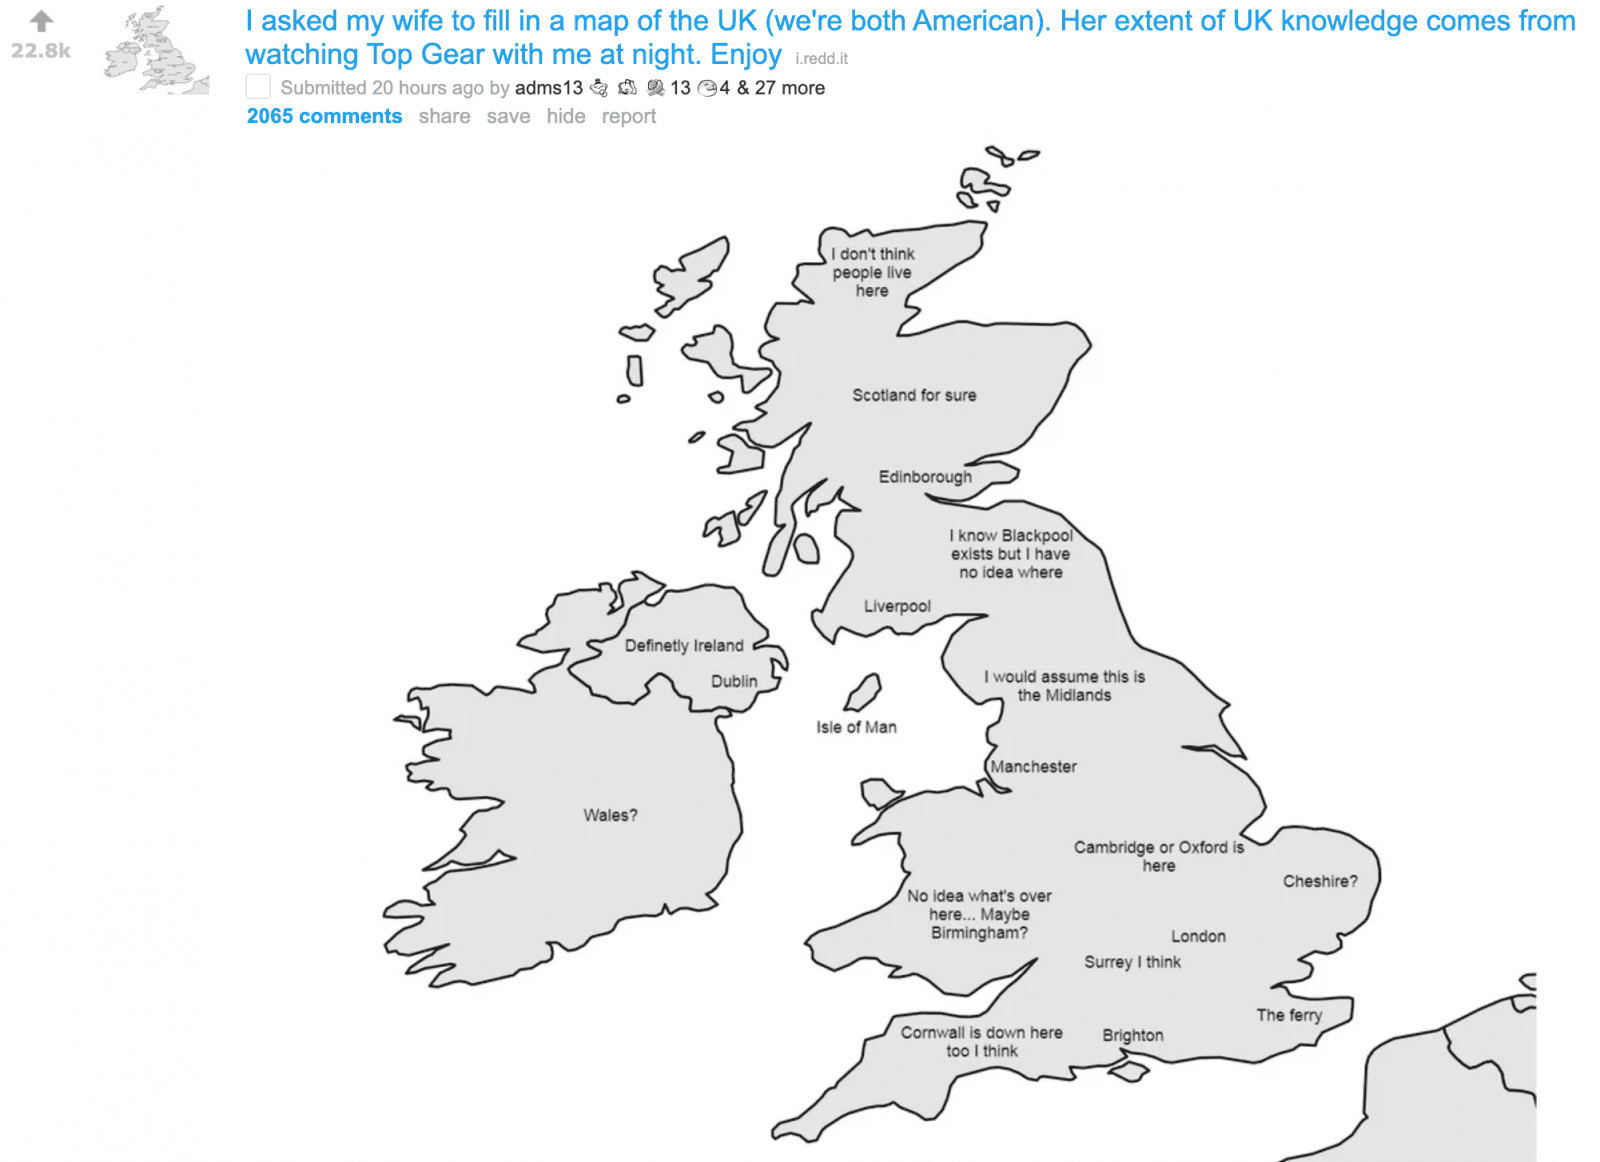 An American woman has filled in a map of the UK and royally messed it up, The Manc